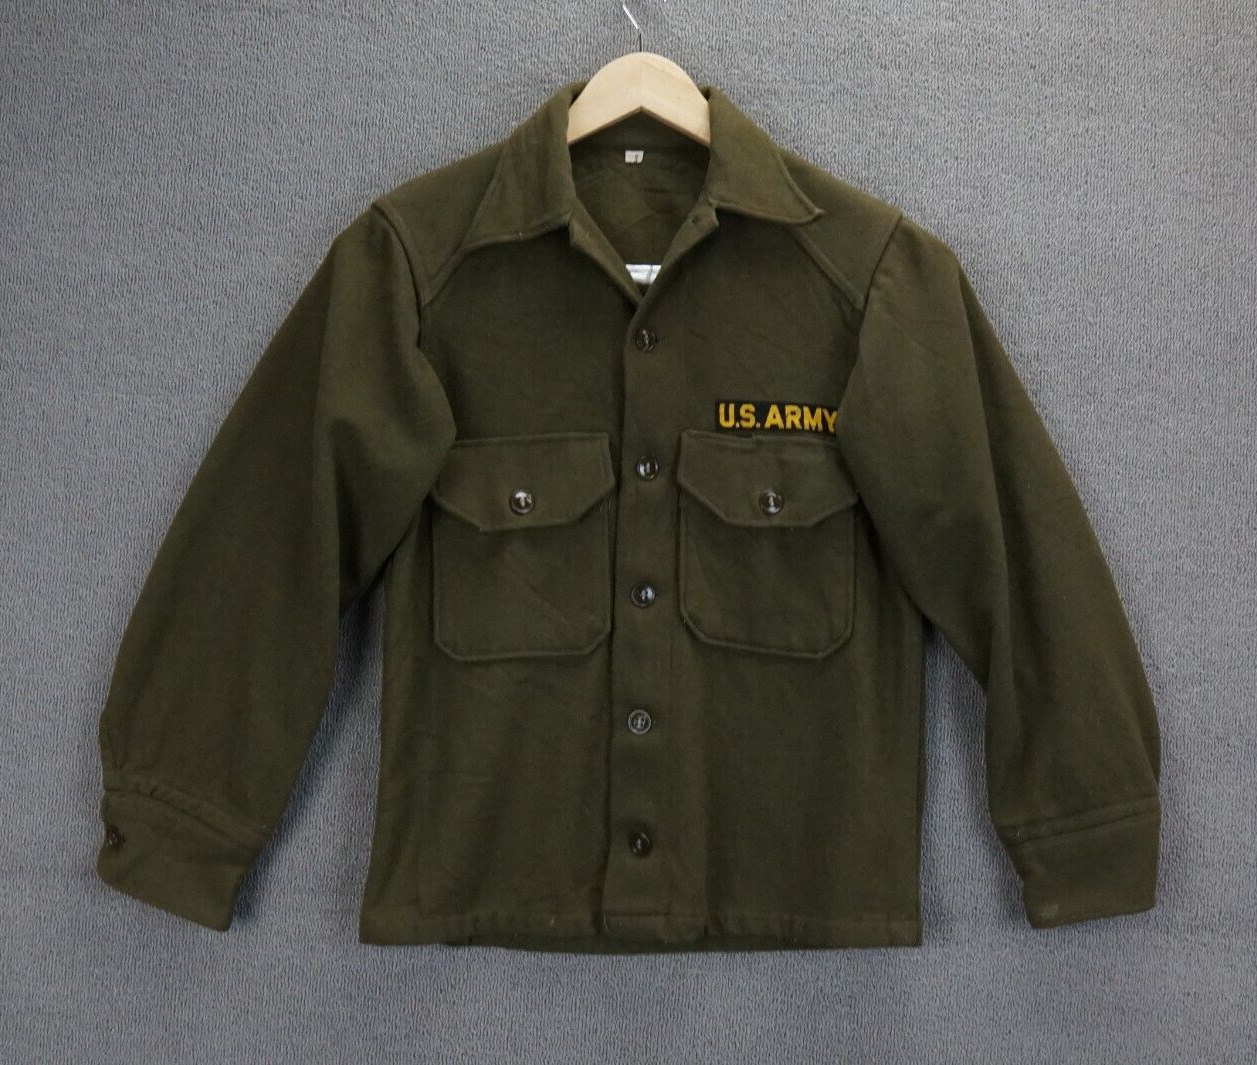 Vintage US Army Field Utility Shirt Jacket Men\'s Small Wool Blend 50s Button Up